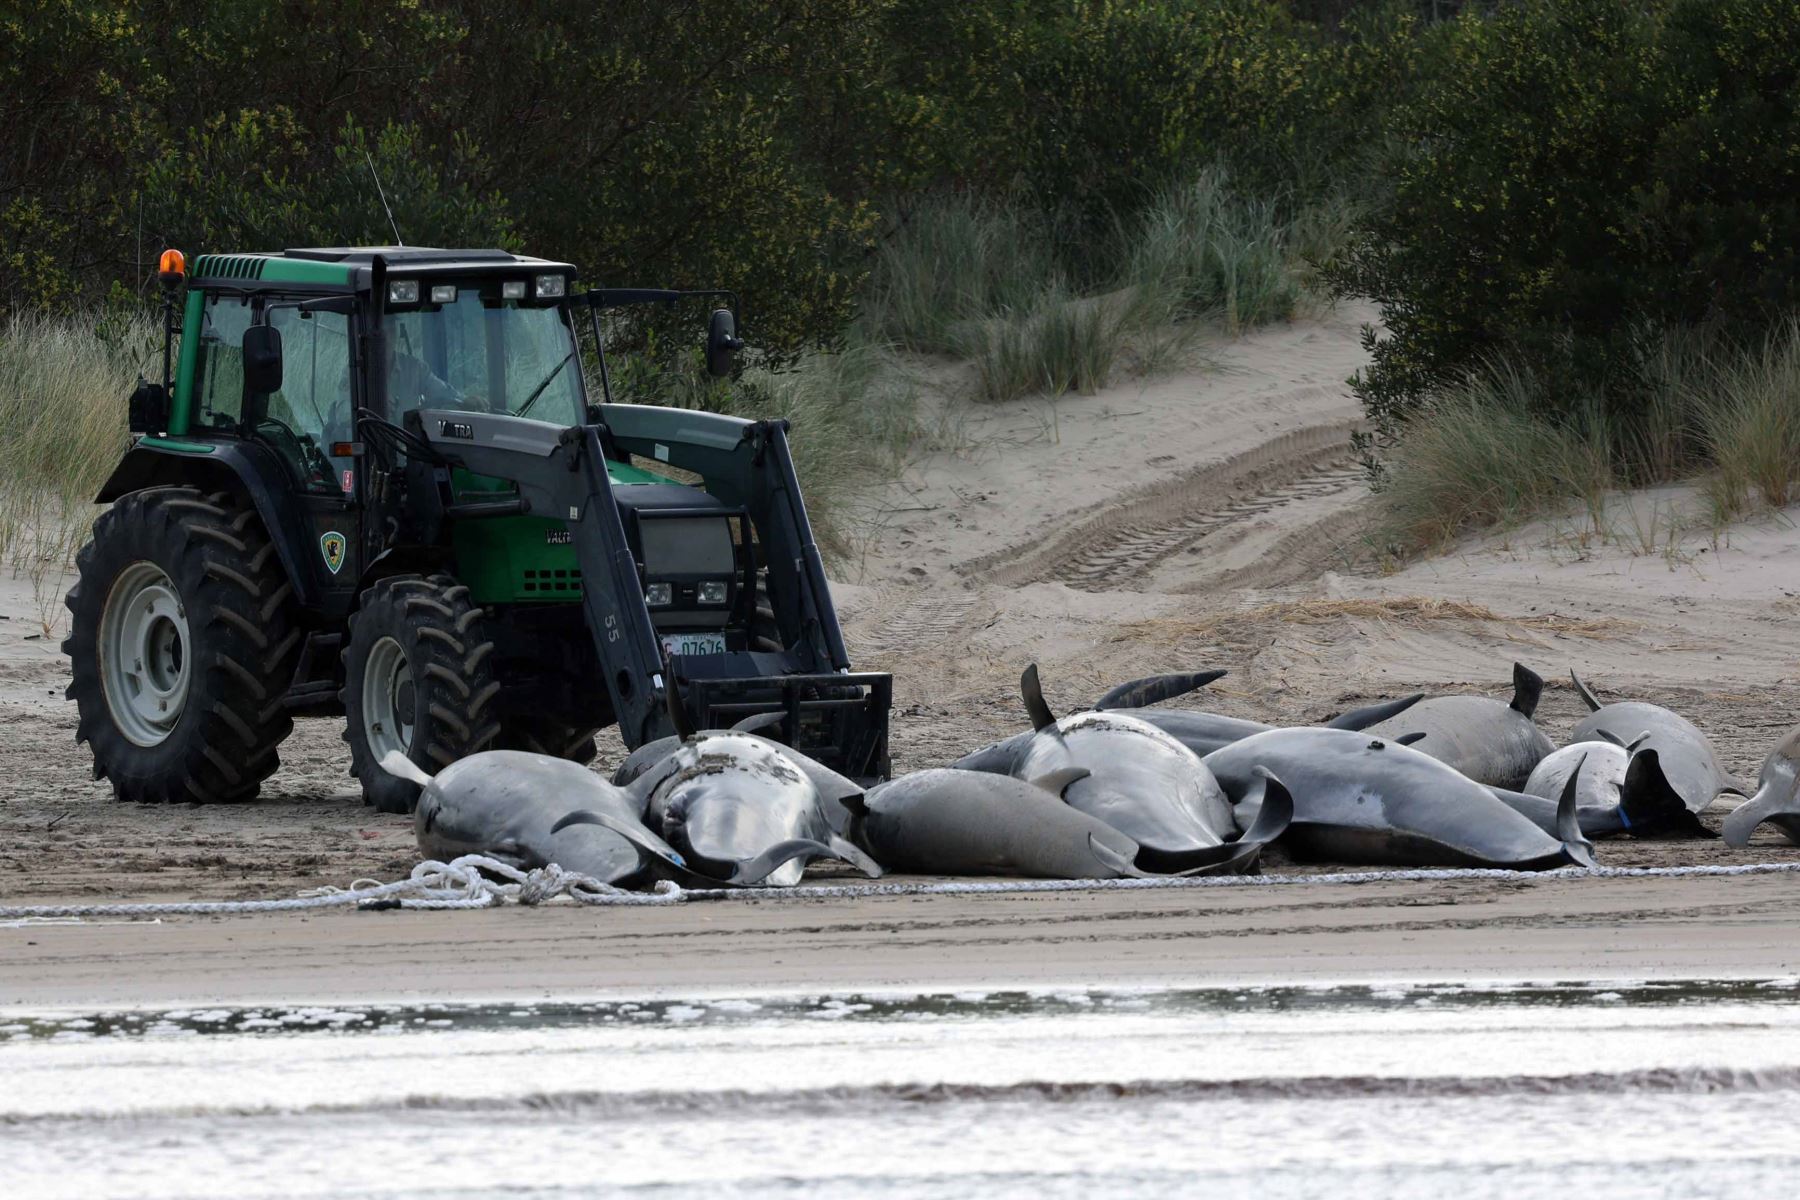 Nearly 200 Pilot Whales Died On A Beach In Macquarie Bay, West Of The Australian Island Of Tasmania, And 35 Were Rescued Alive After Being Largely Stranded In This Remote Location, Country Officials Reported On Thursday.  Photo: Afp